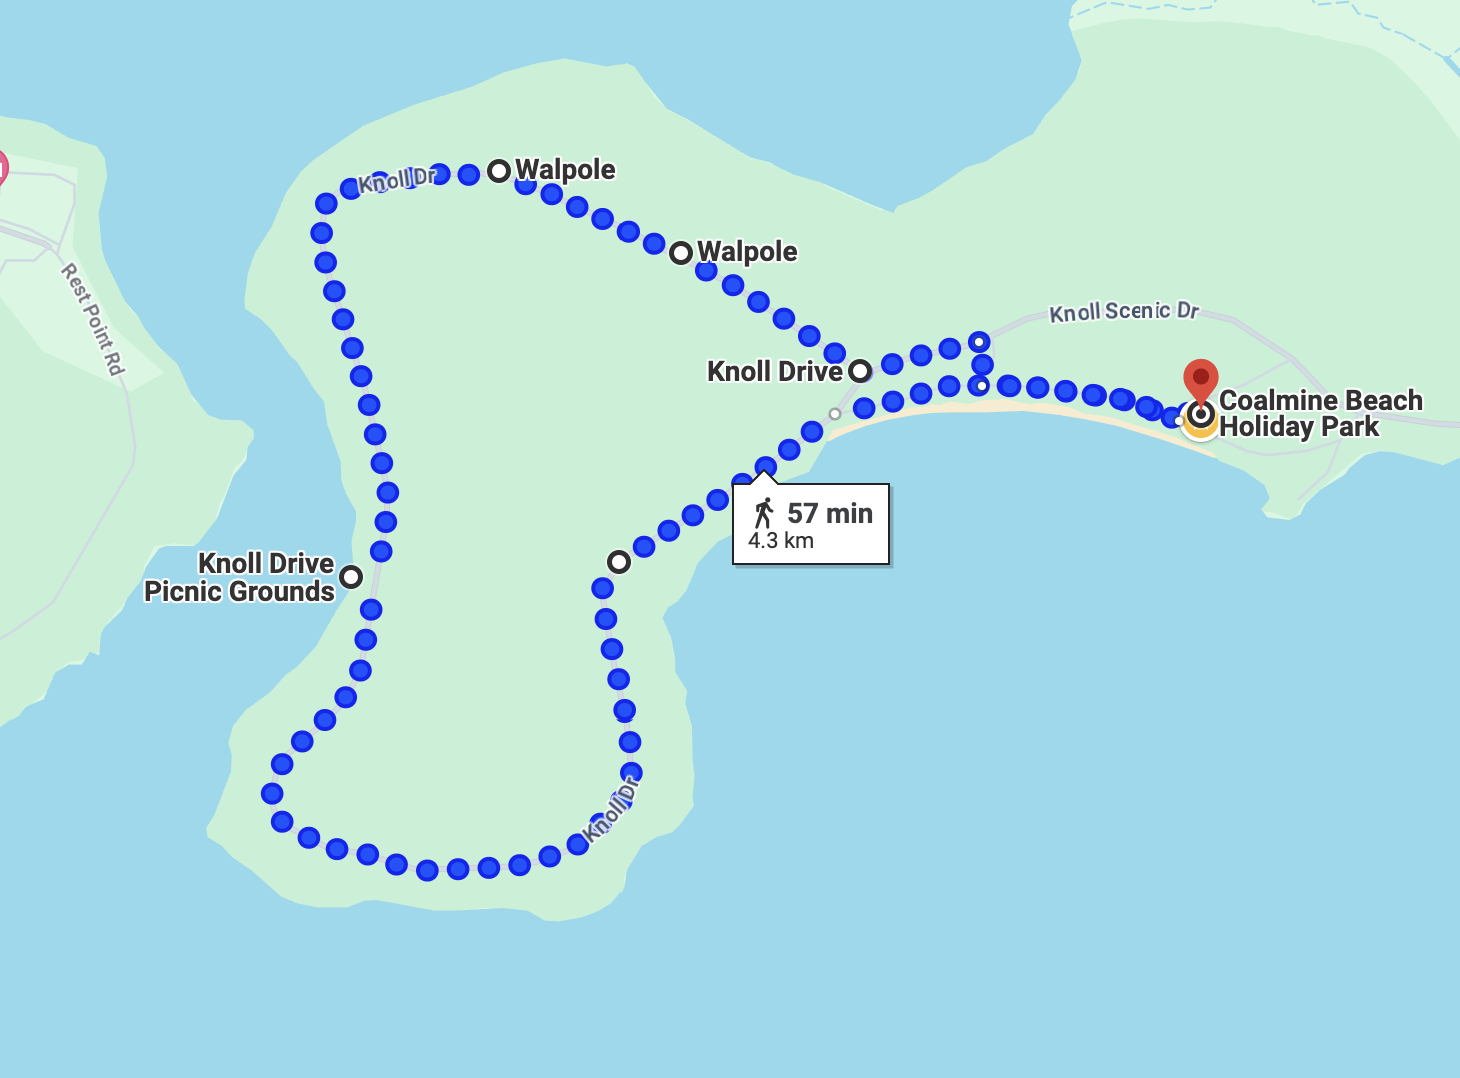 Walking time frame from Google Maps around Knoll scenic drive